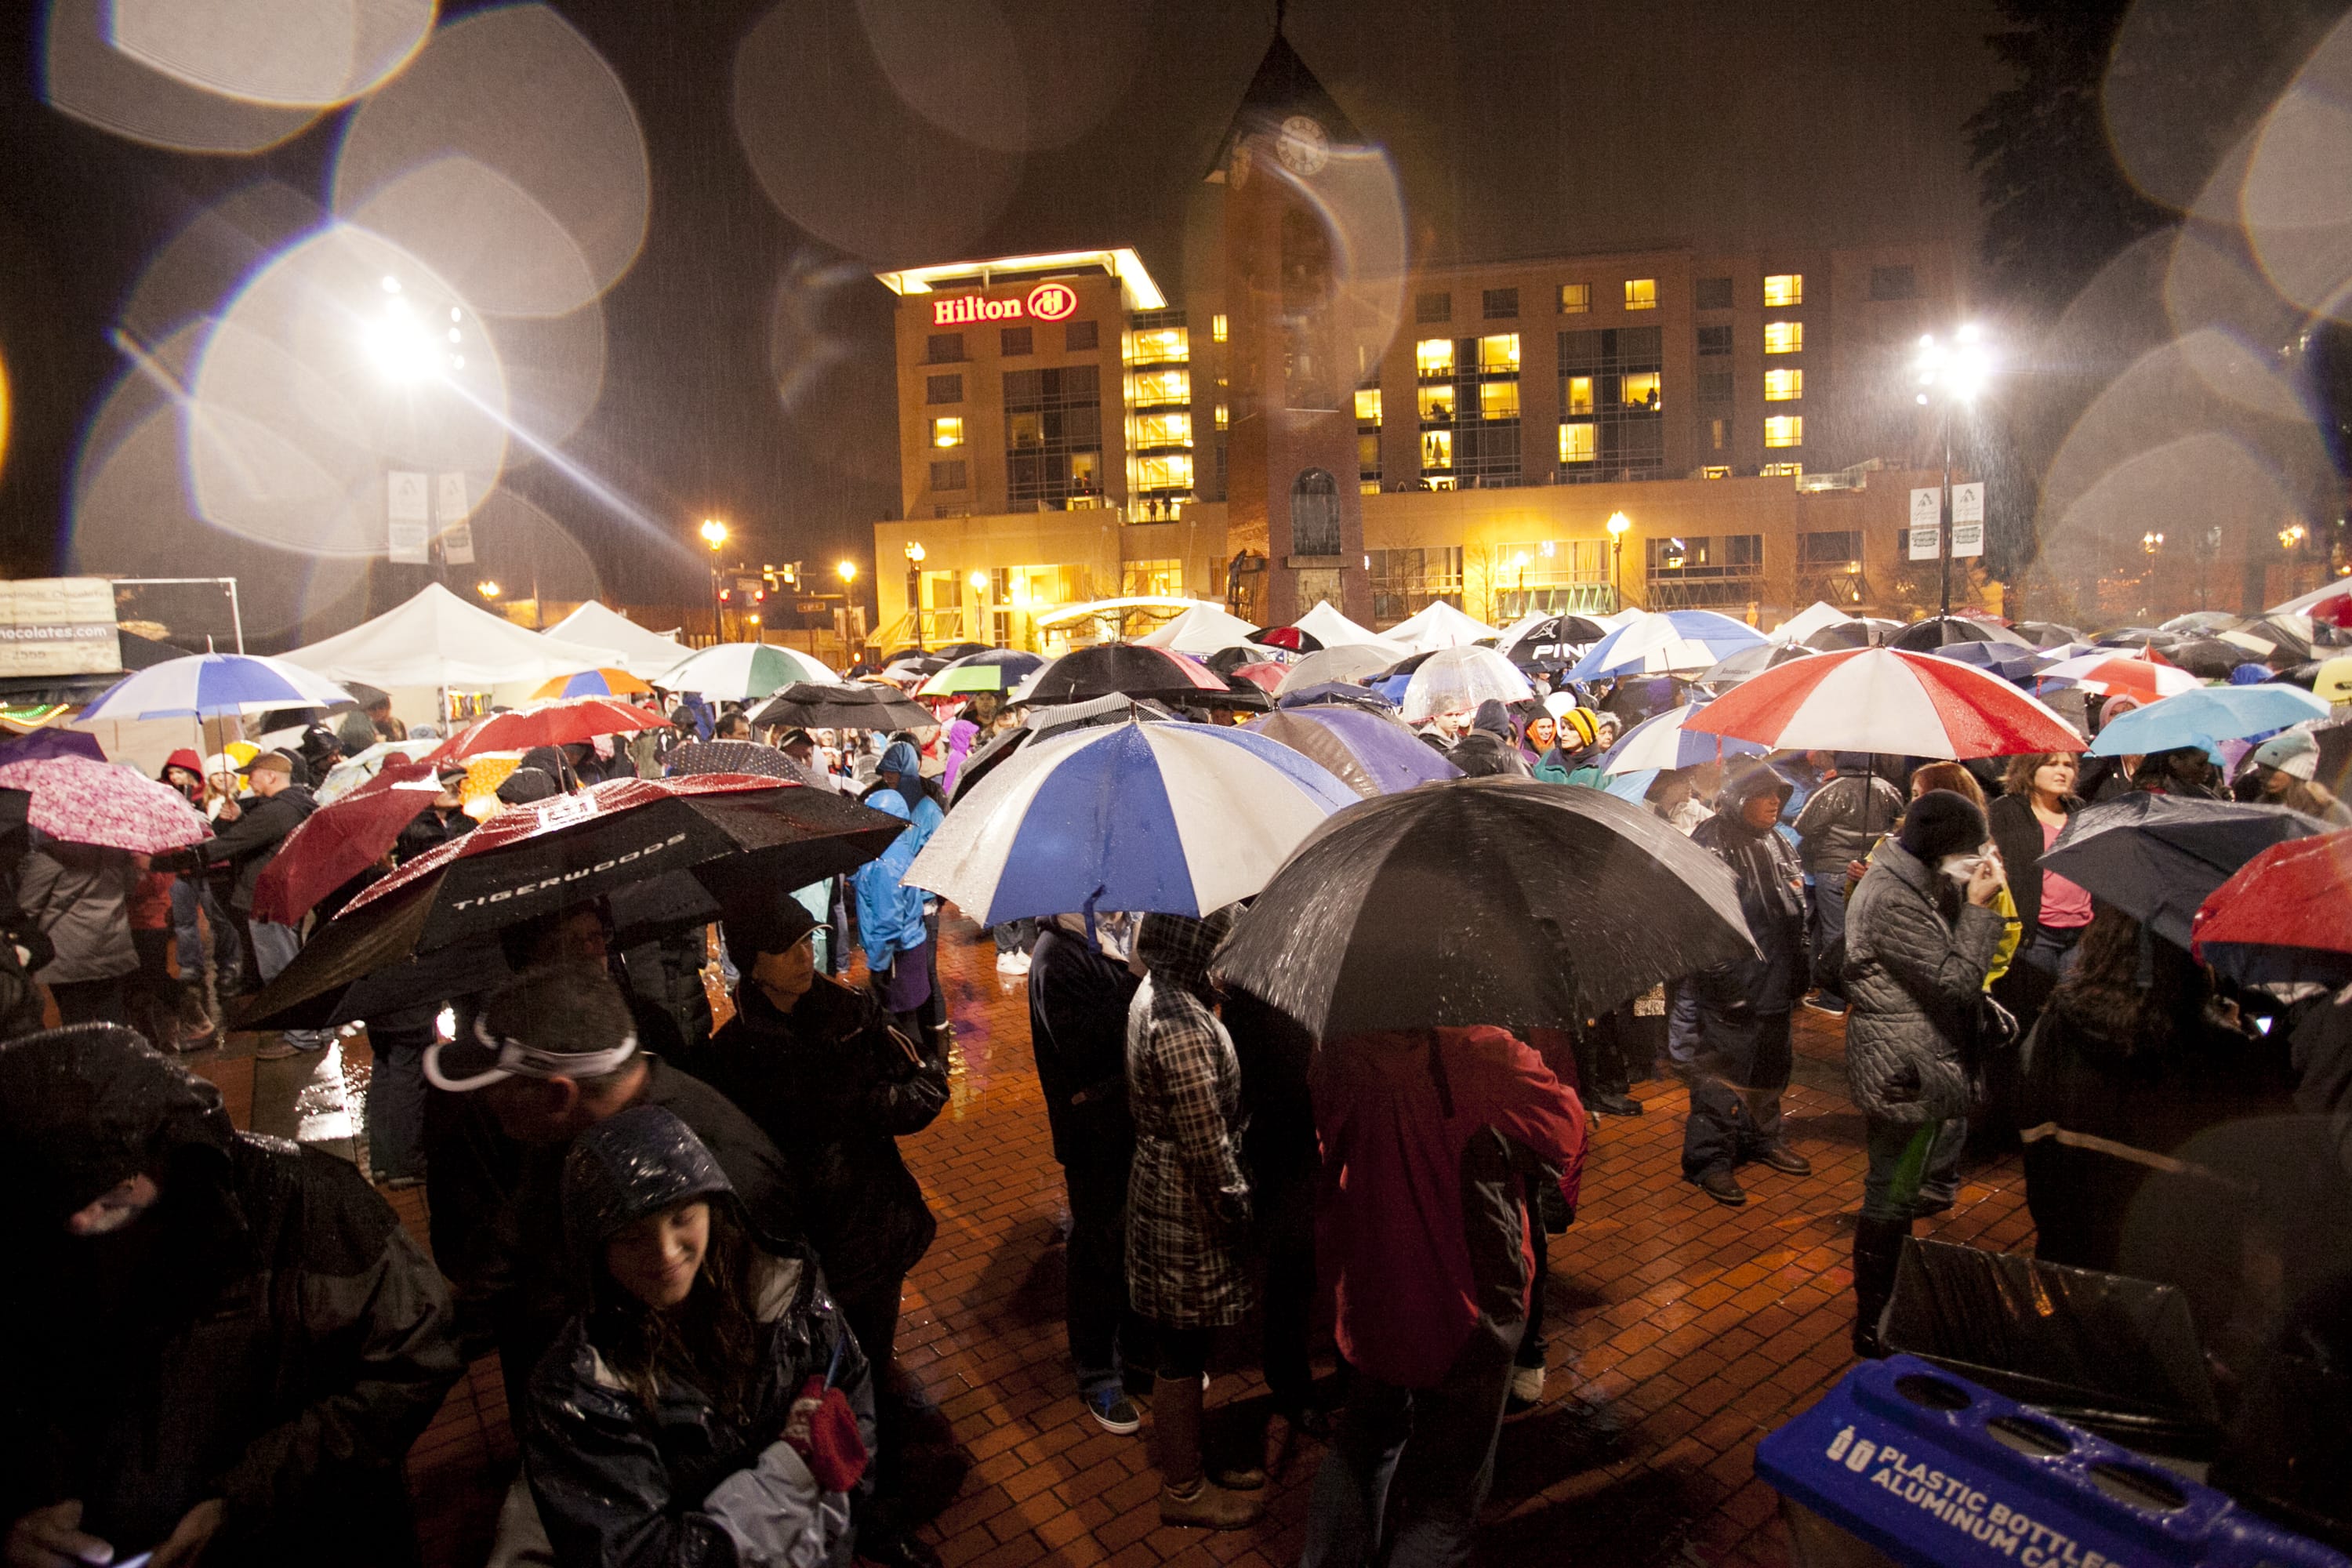 Crowds of people wearing raincoats and huddled under umbrellas attend the Vancouver Rotary Foundation's 17th annual community tree-lighting Friday evening at Esther Short Park.